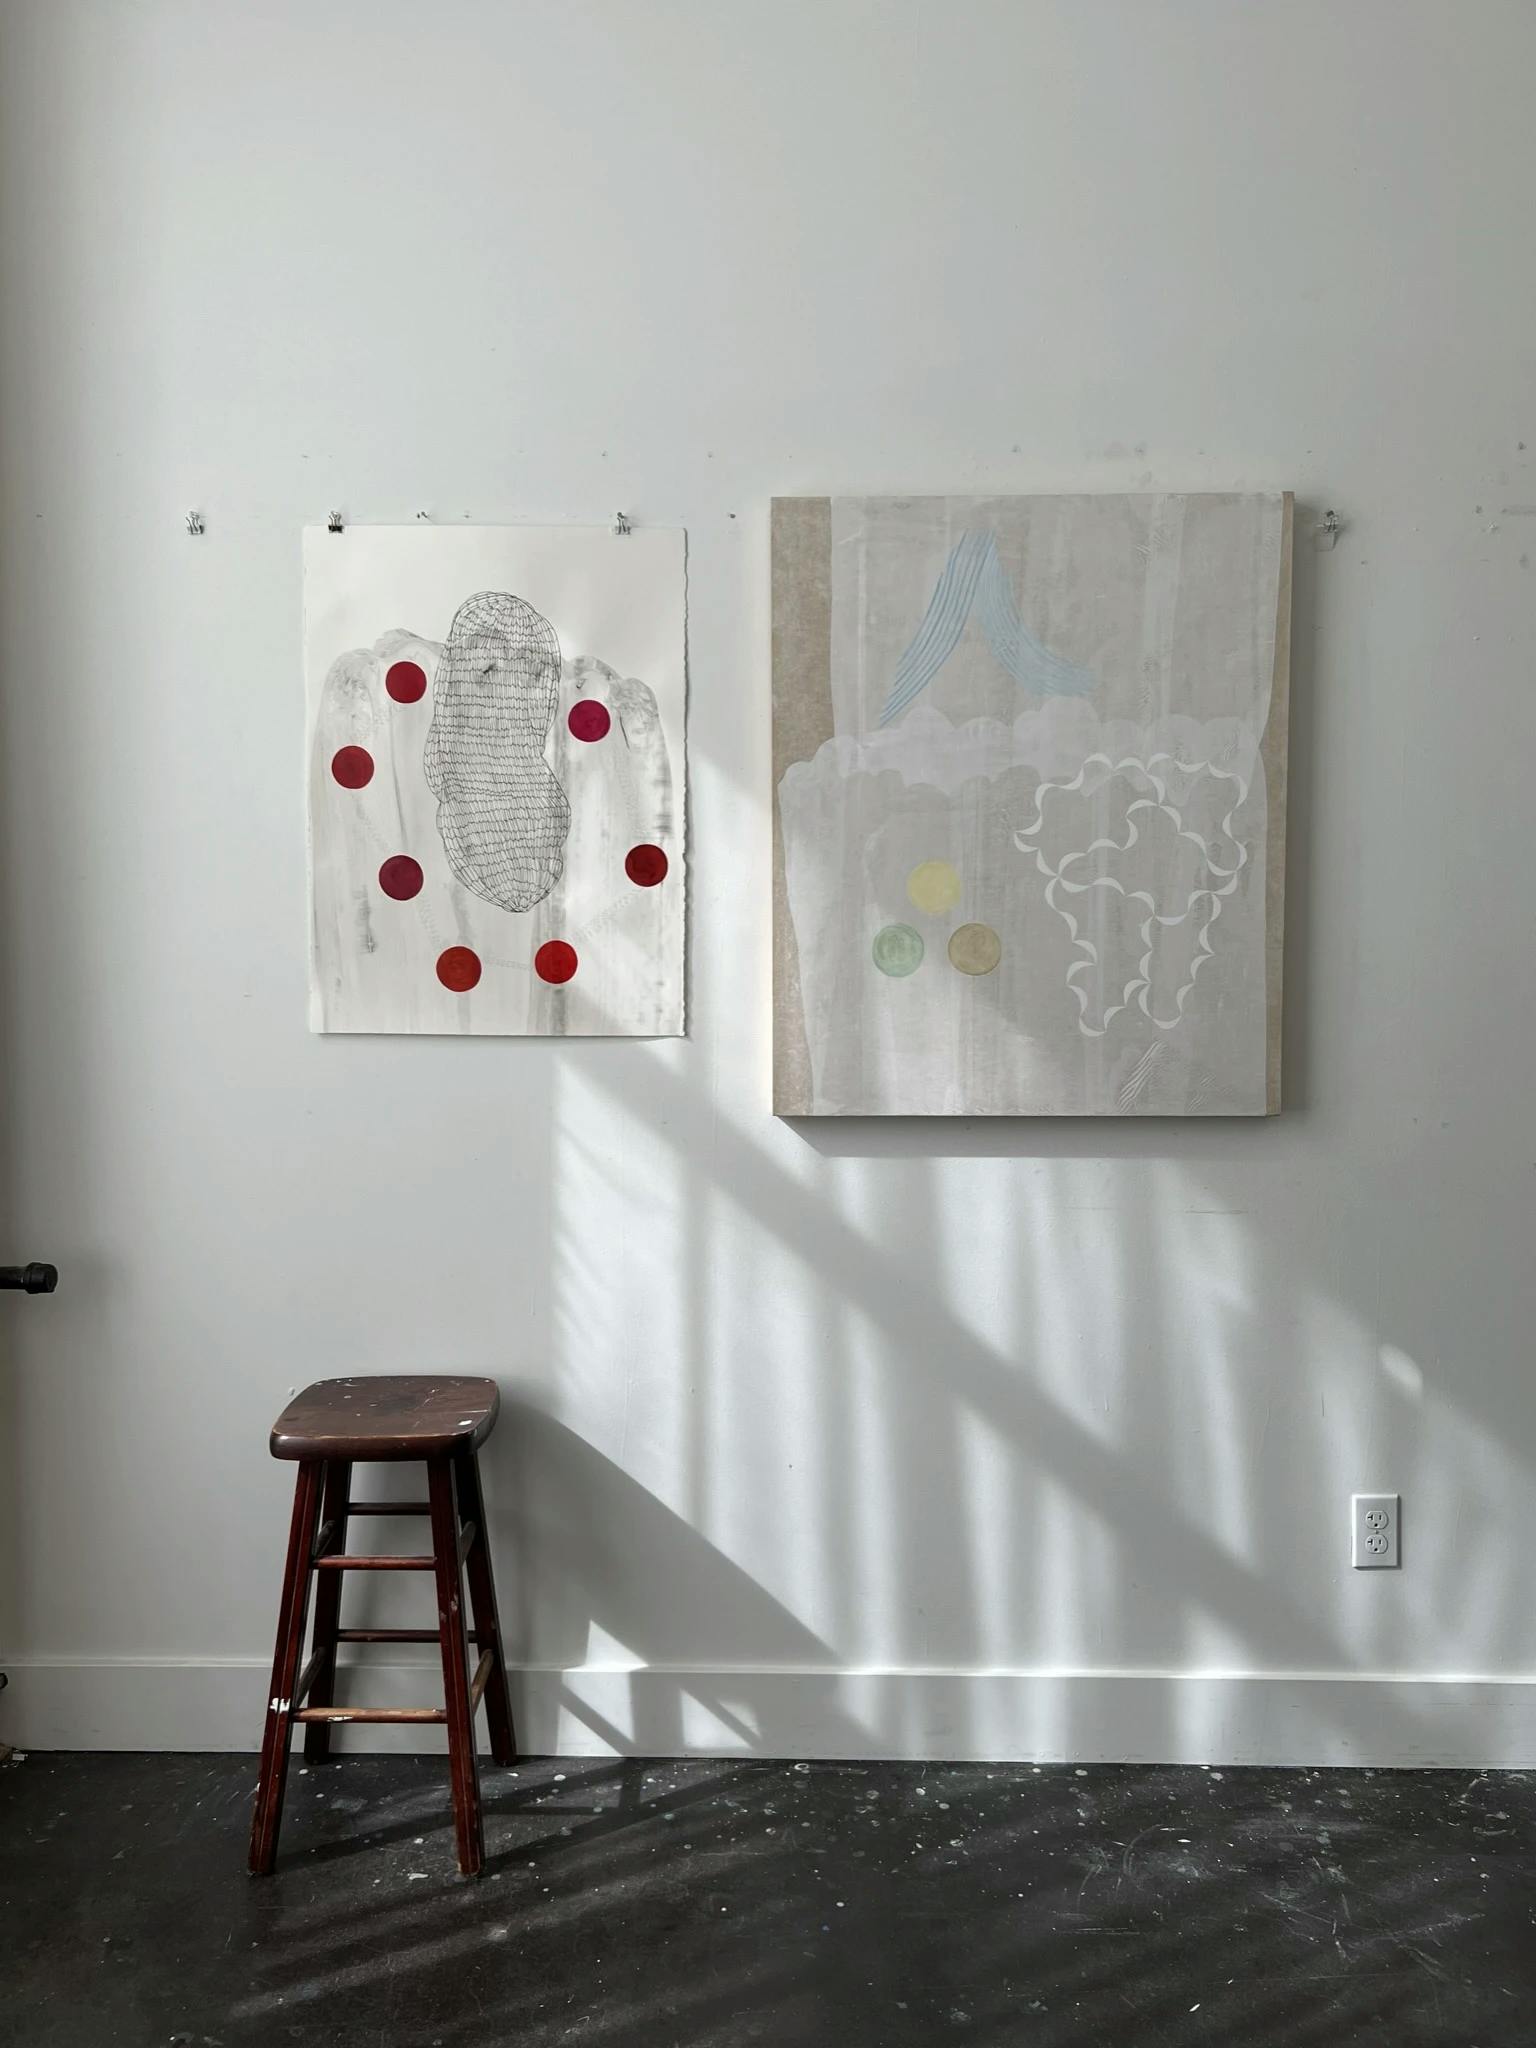 Two abstract paintings by artist Lydia Bassis installed on a white wall in her studio with a wooden stool on the left.